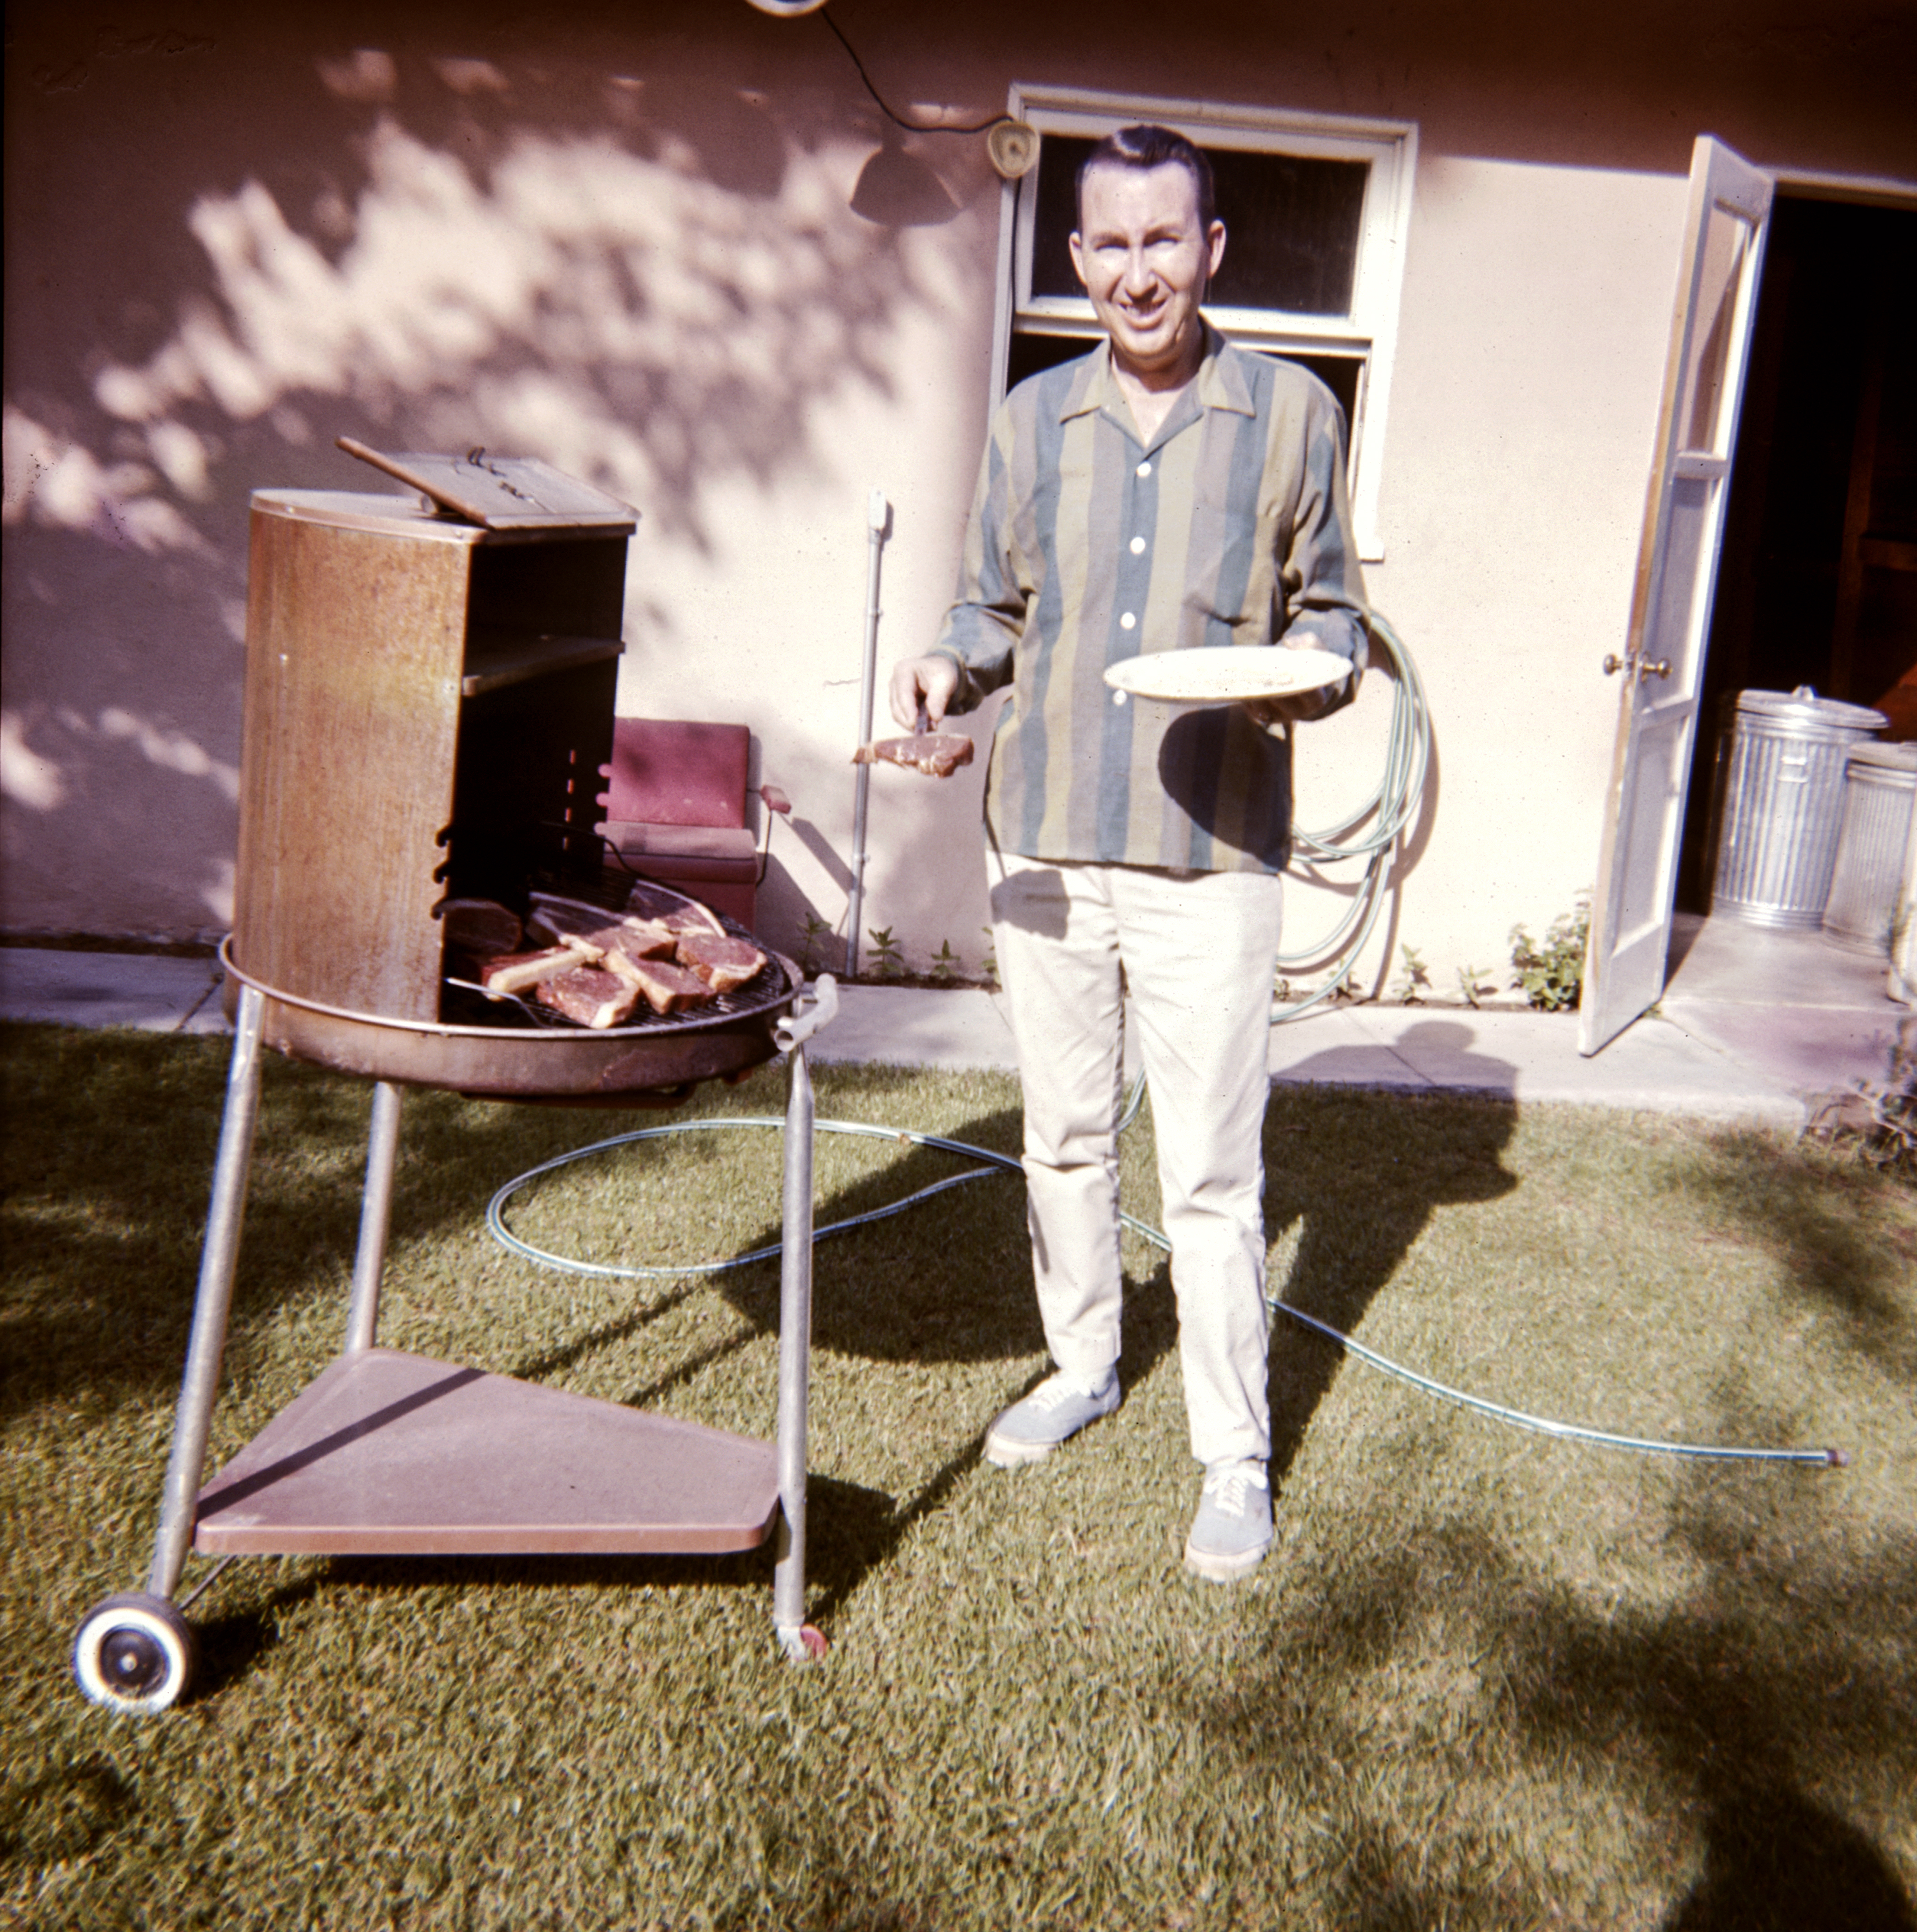 Caucasian man cooking meat on barbecue in yard